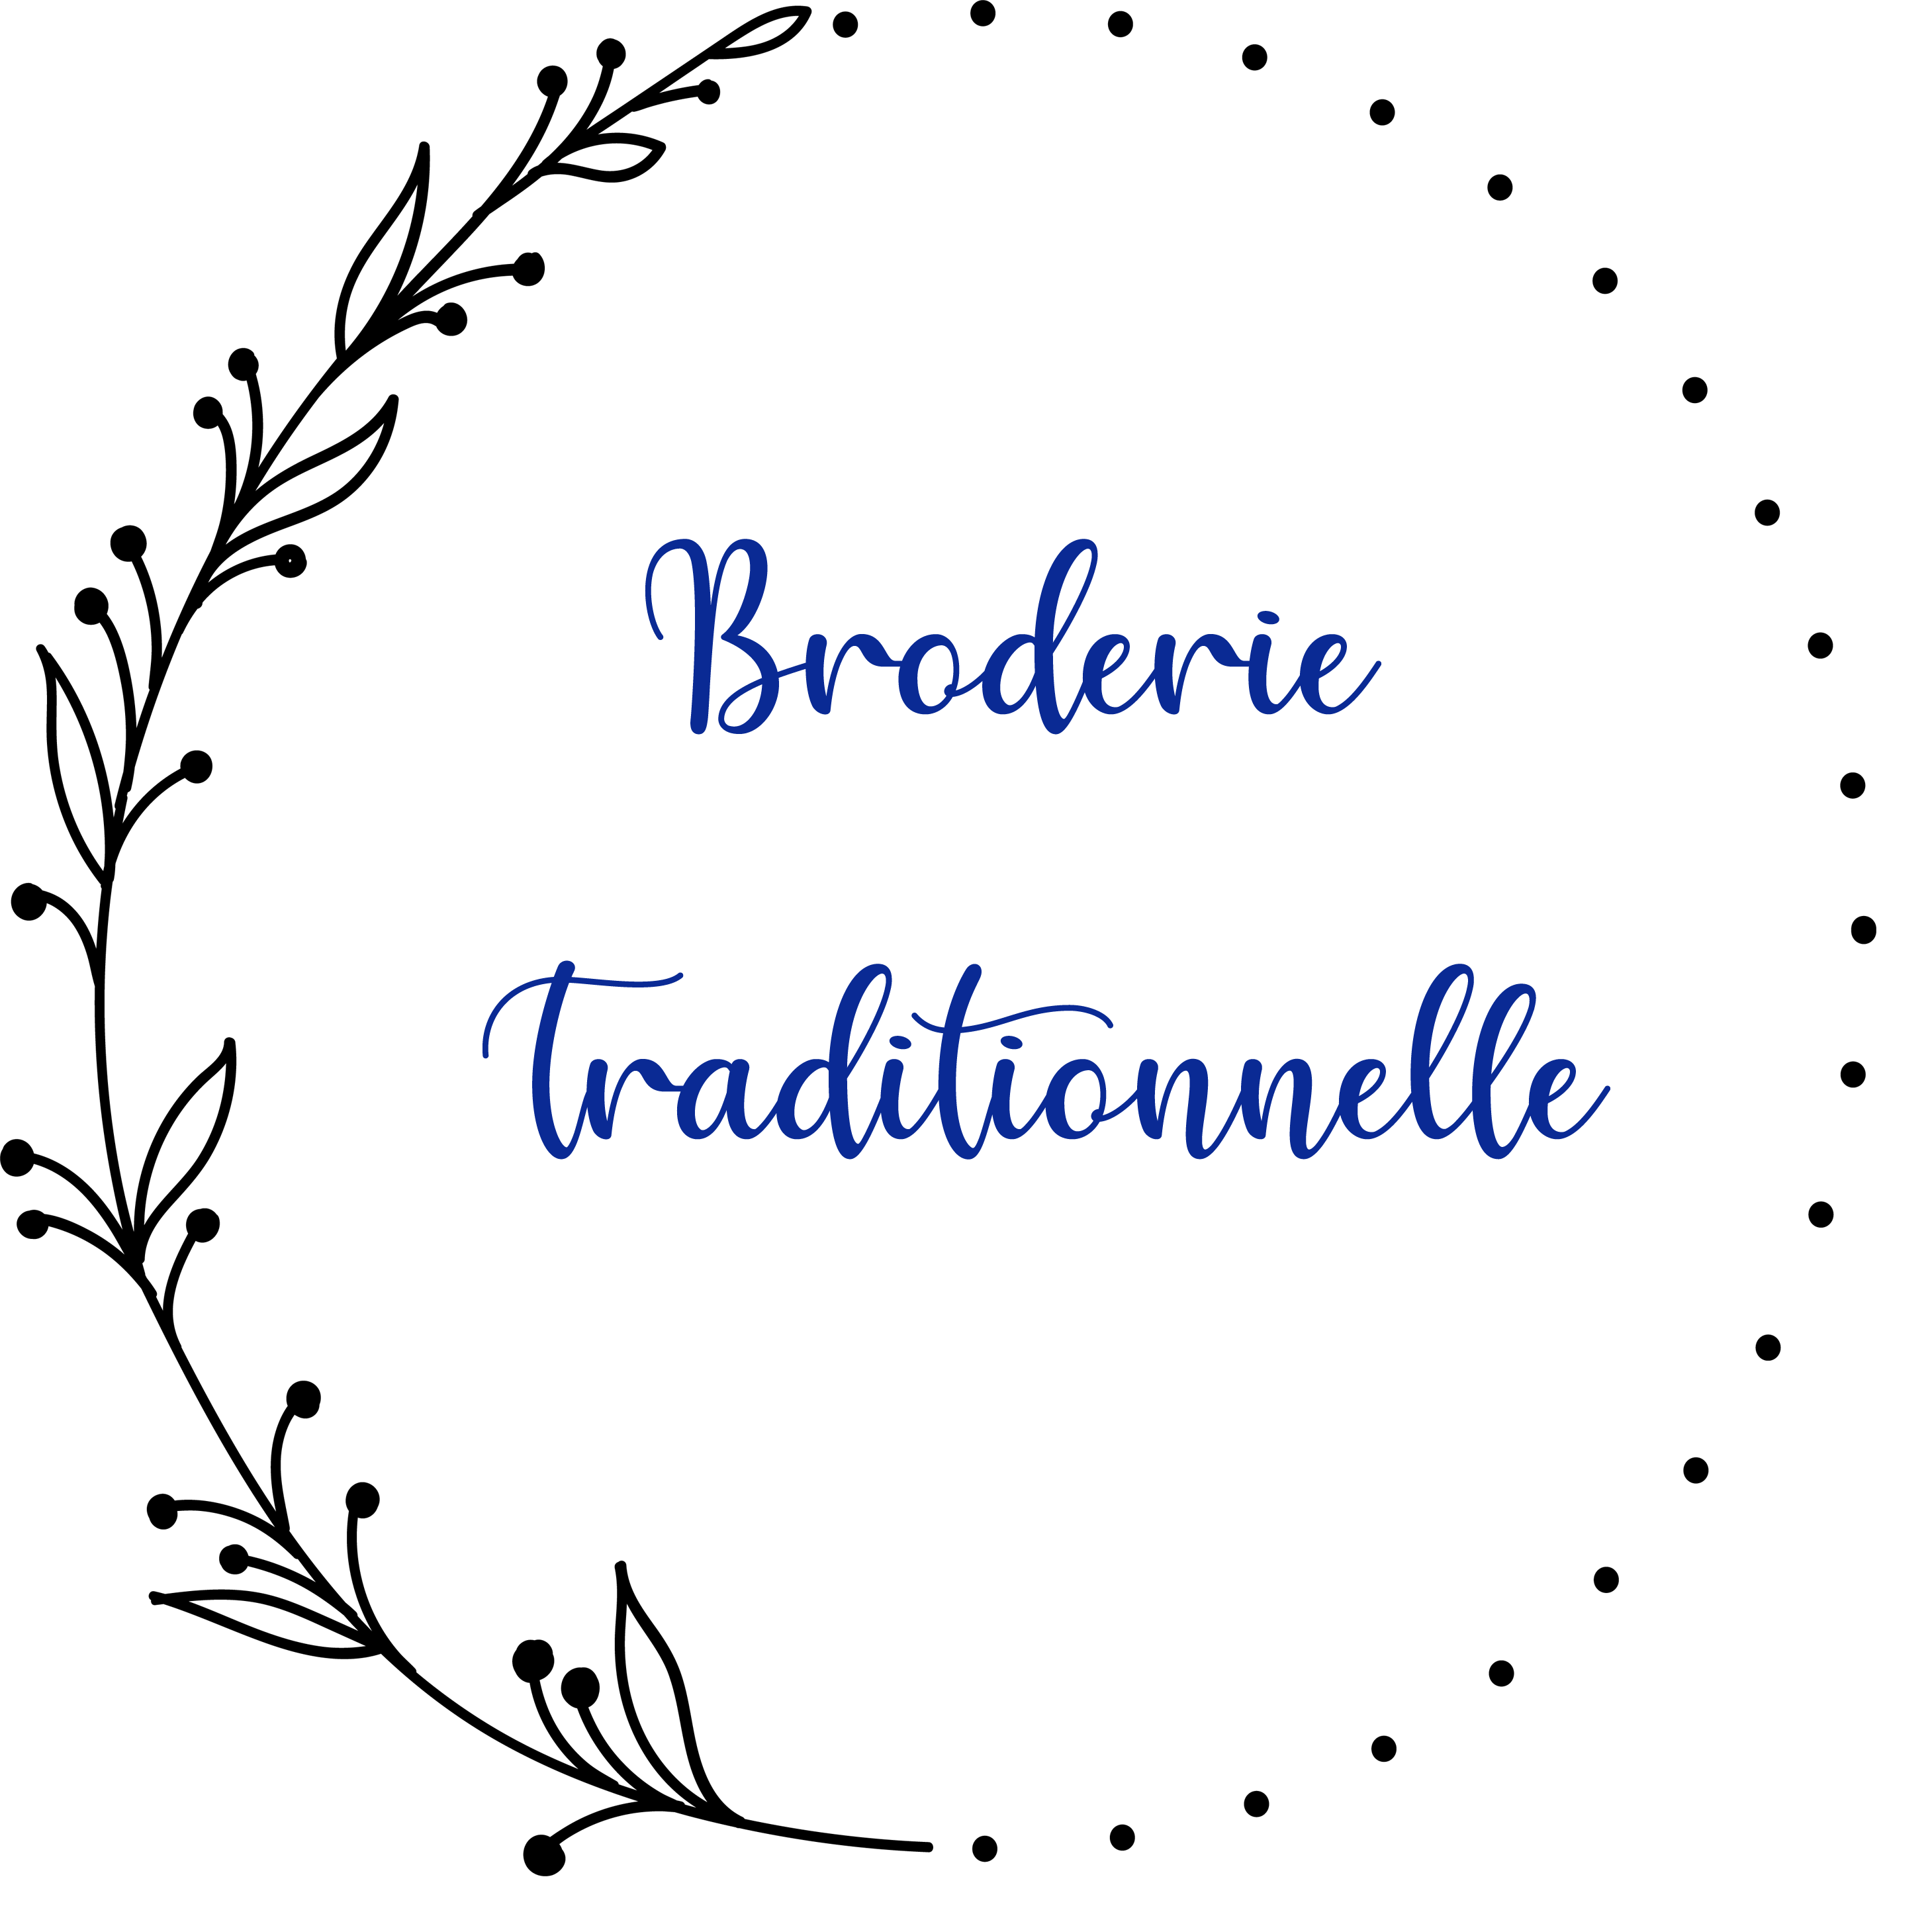 broderie traditionnelle